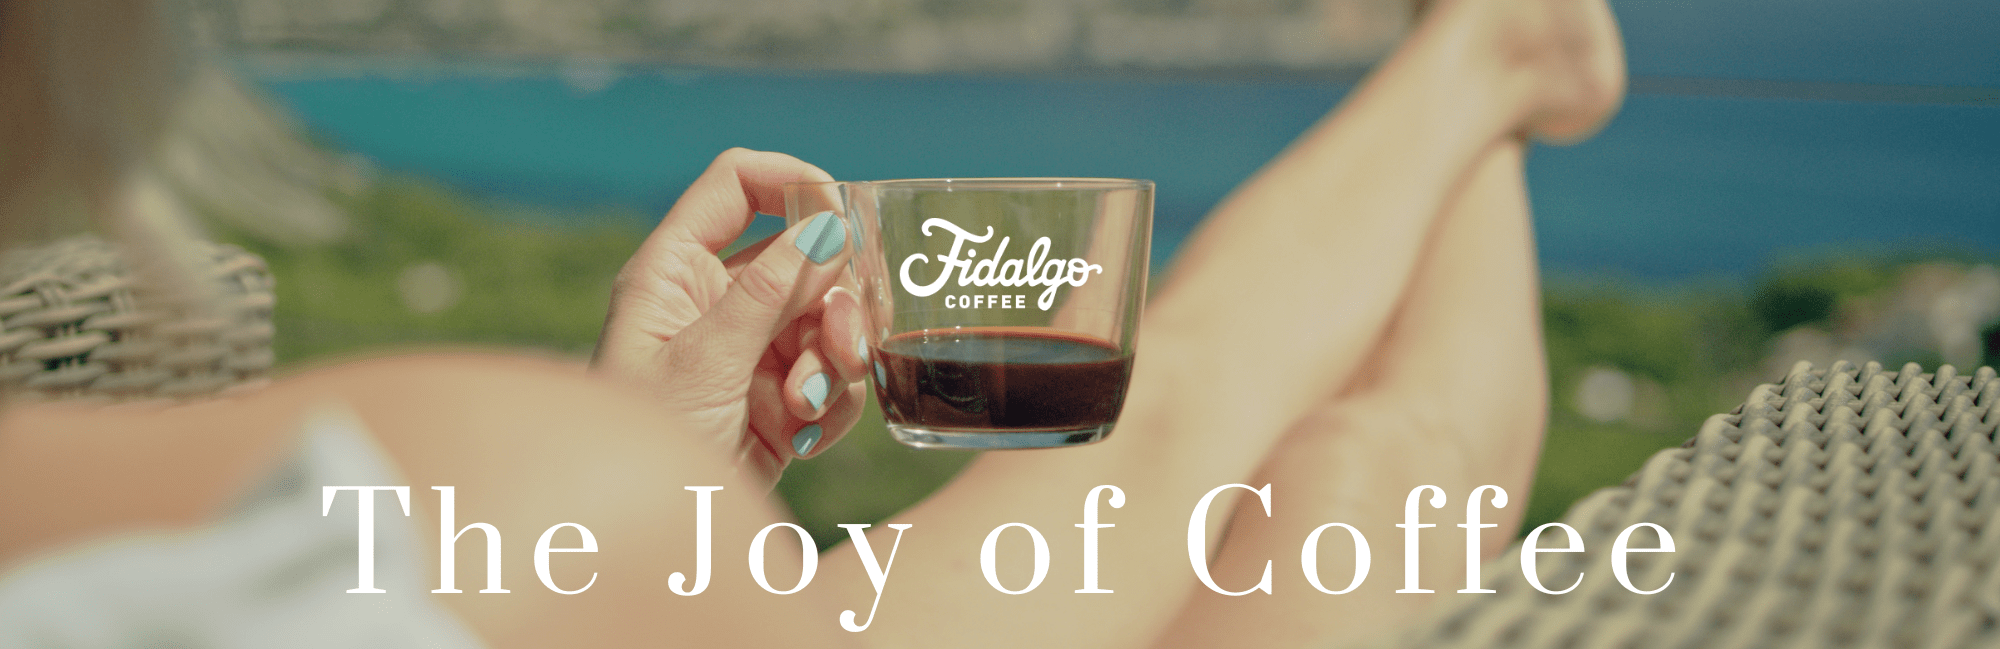 The Joy of Coffee Banner